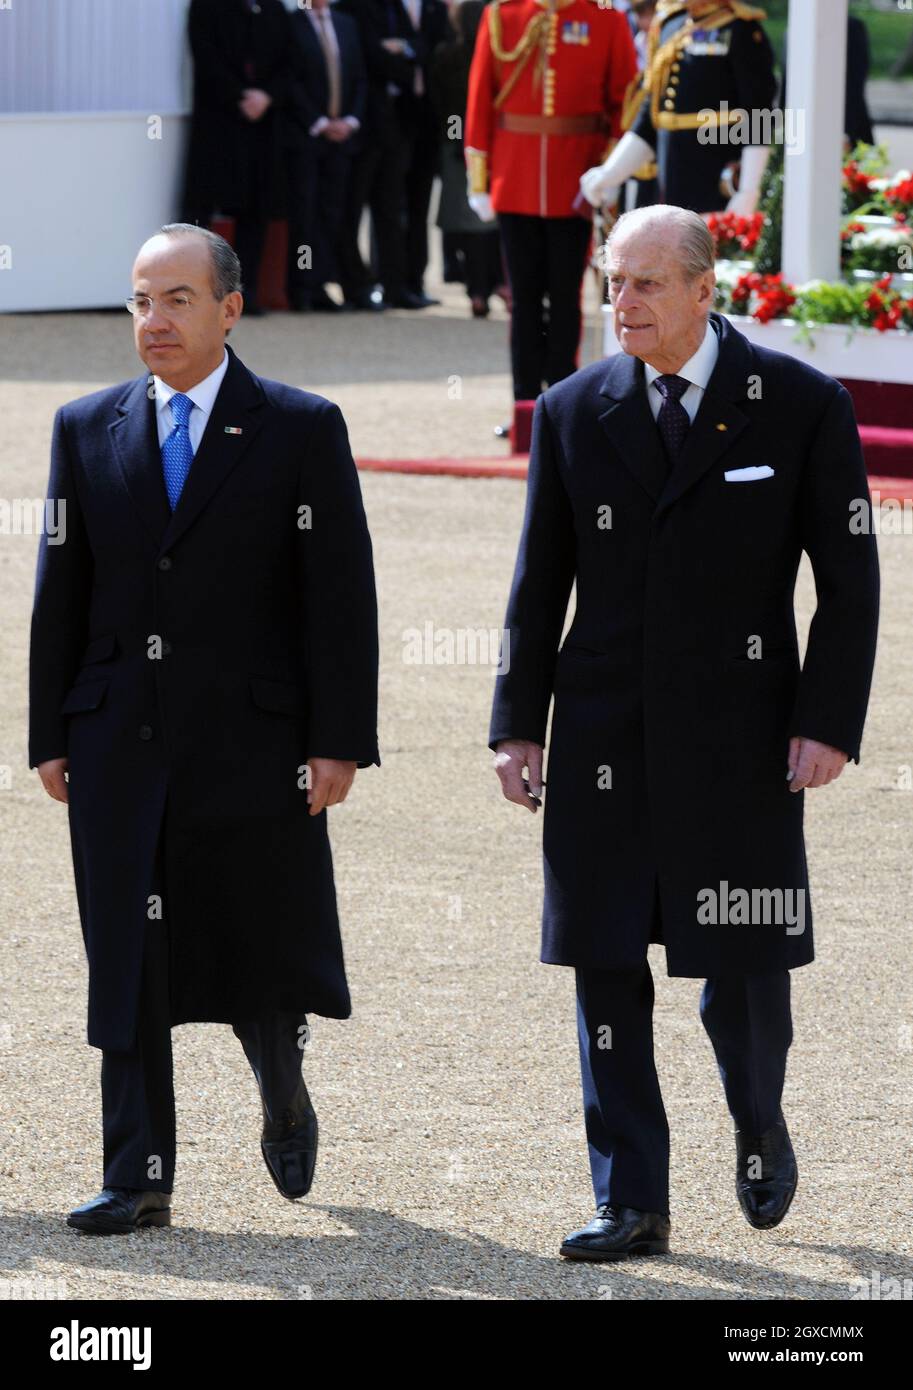 President Felipe Calderon of Mexico, accompanied by Prince Philip, Duke of Edinburgh, reviews a Guard of Honour at the start of a State Visit to Britain. Stock Photo